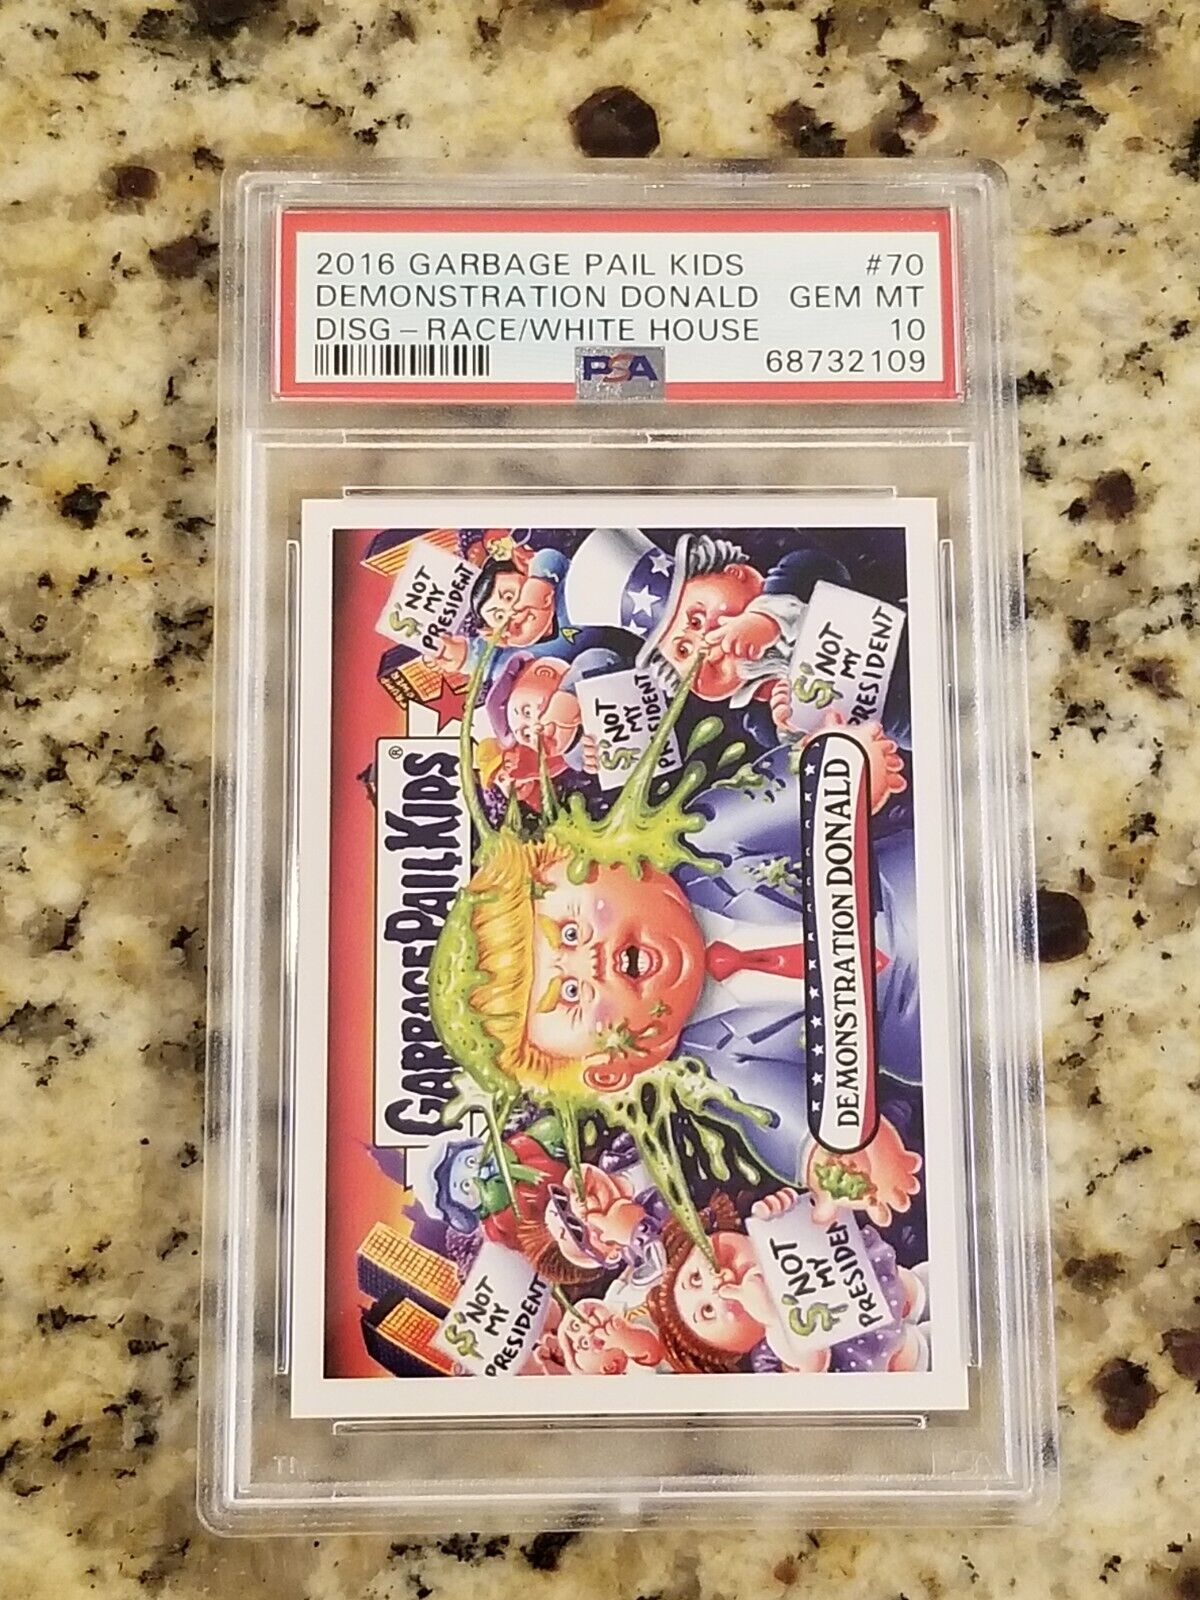 2016 GPK Disgrace to the White House  DEMONSTRATION DONALD Card PSA 10